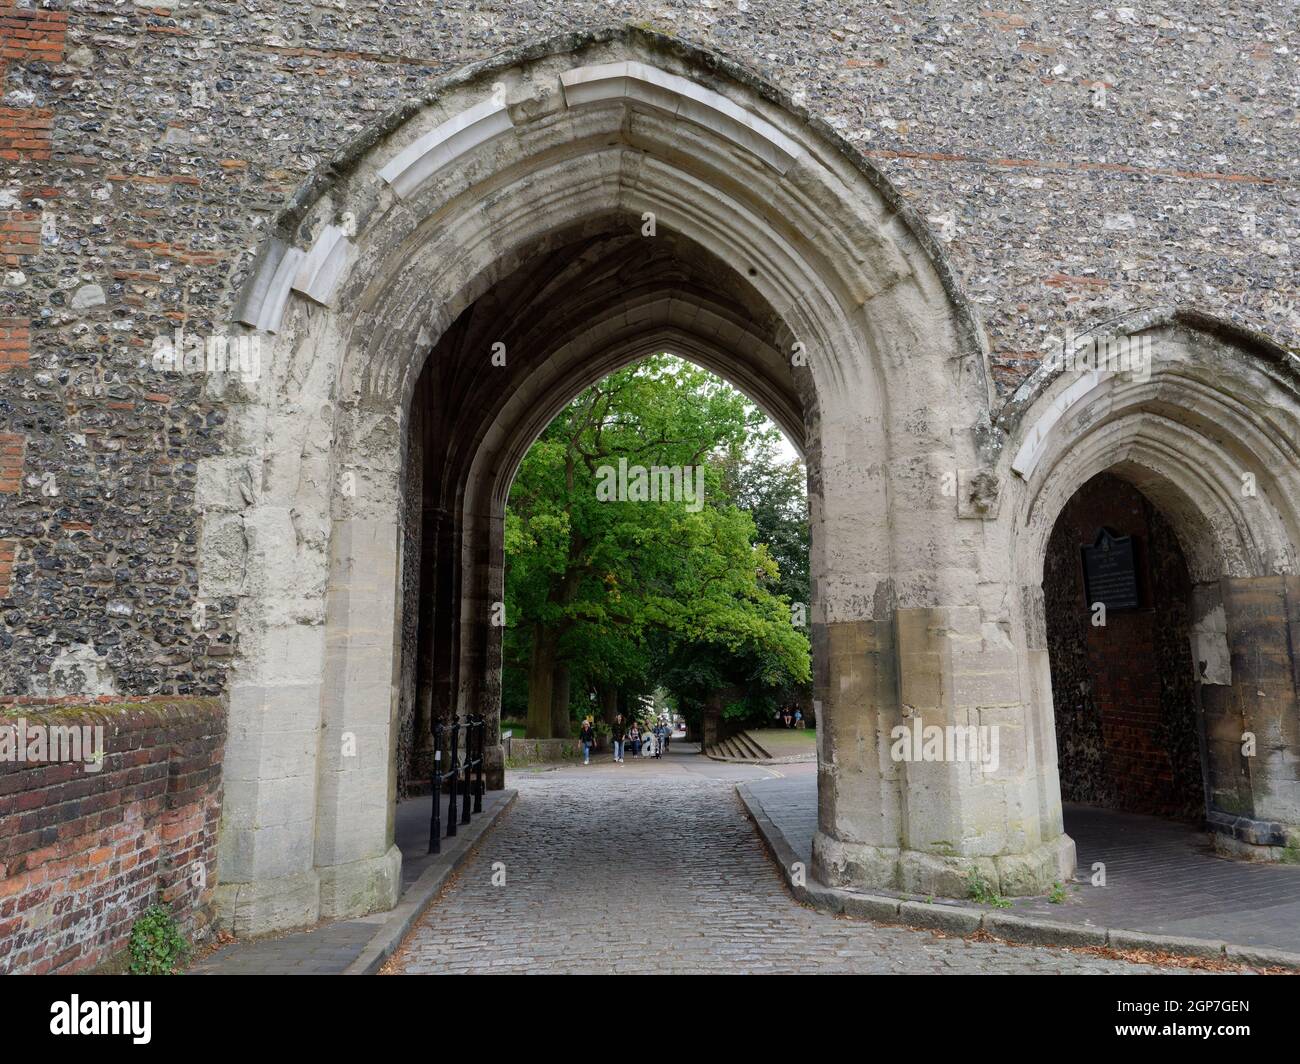 St Albans, Hertfordshire, England, September 21 2021: Archway across Abbey Mill Lane that forms part of the building of St Albans School. Stock Photo